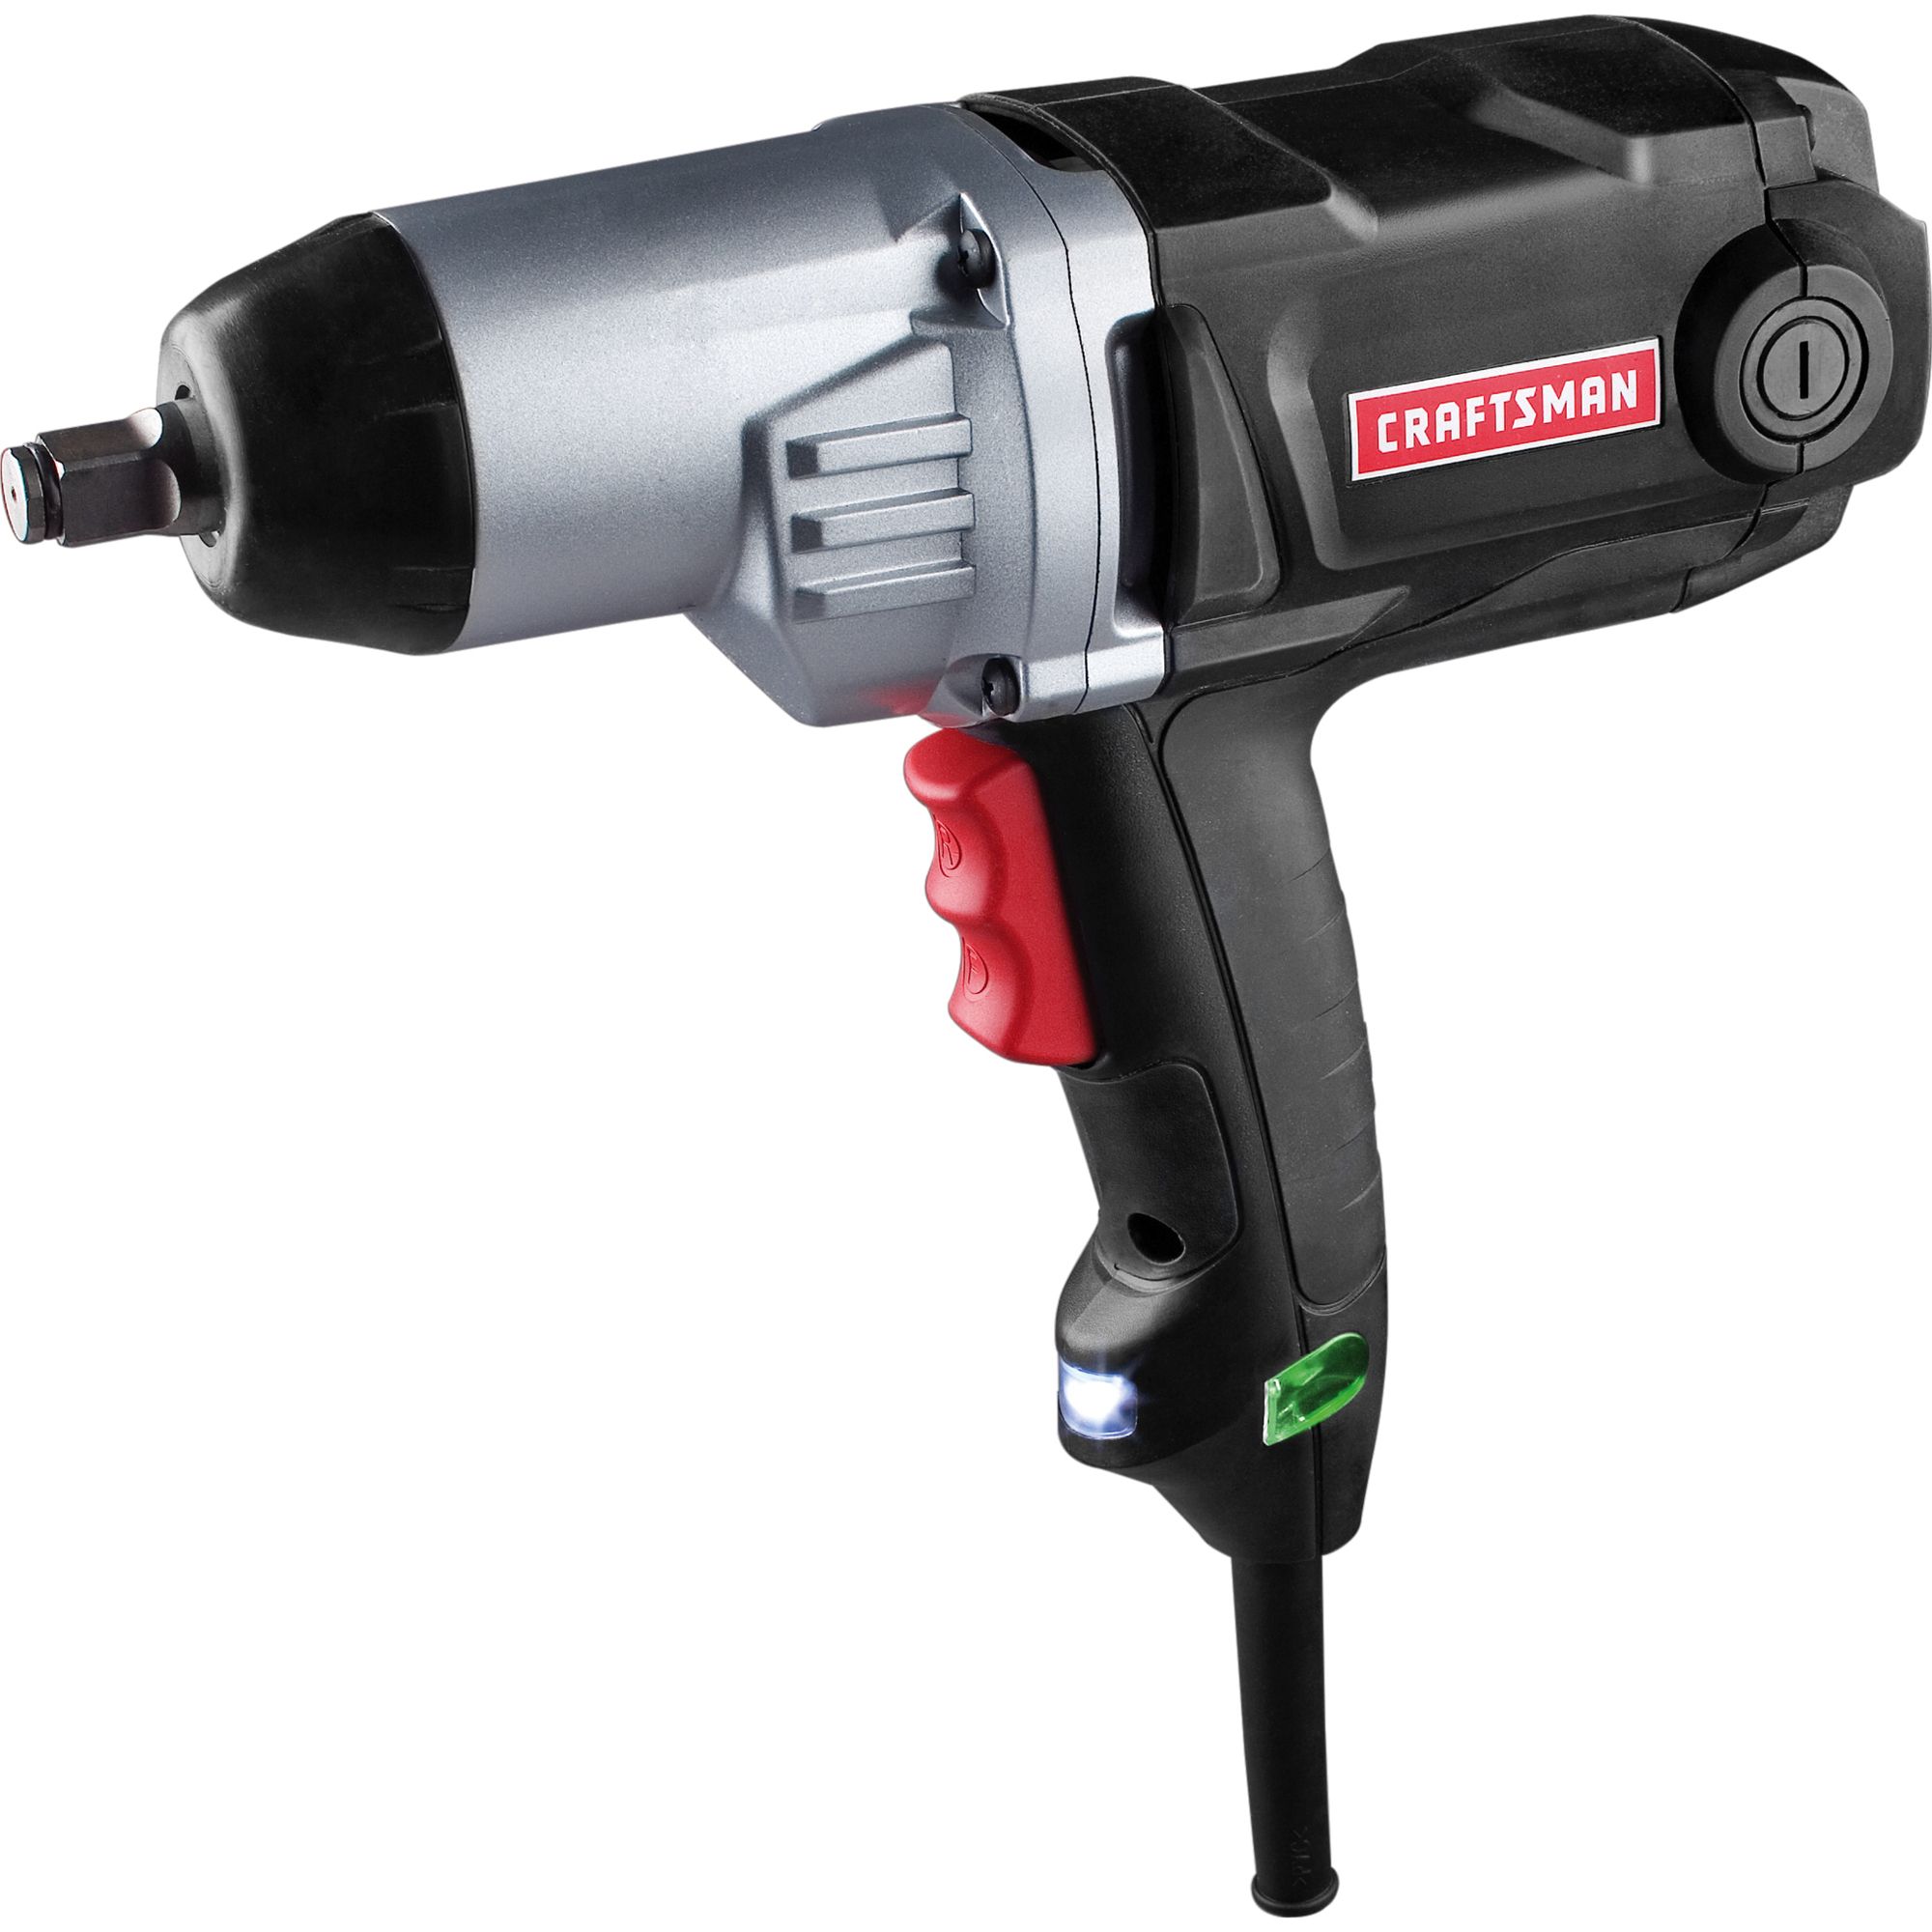 craftsman tools sold by sears is an example of